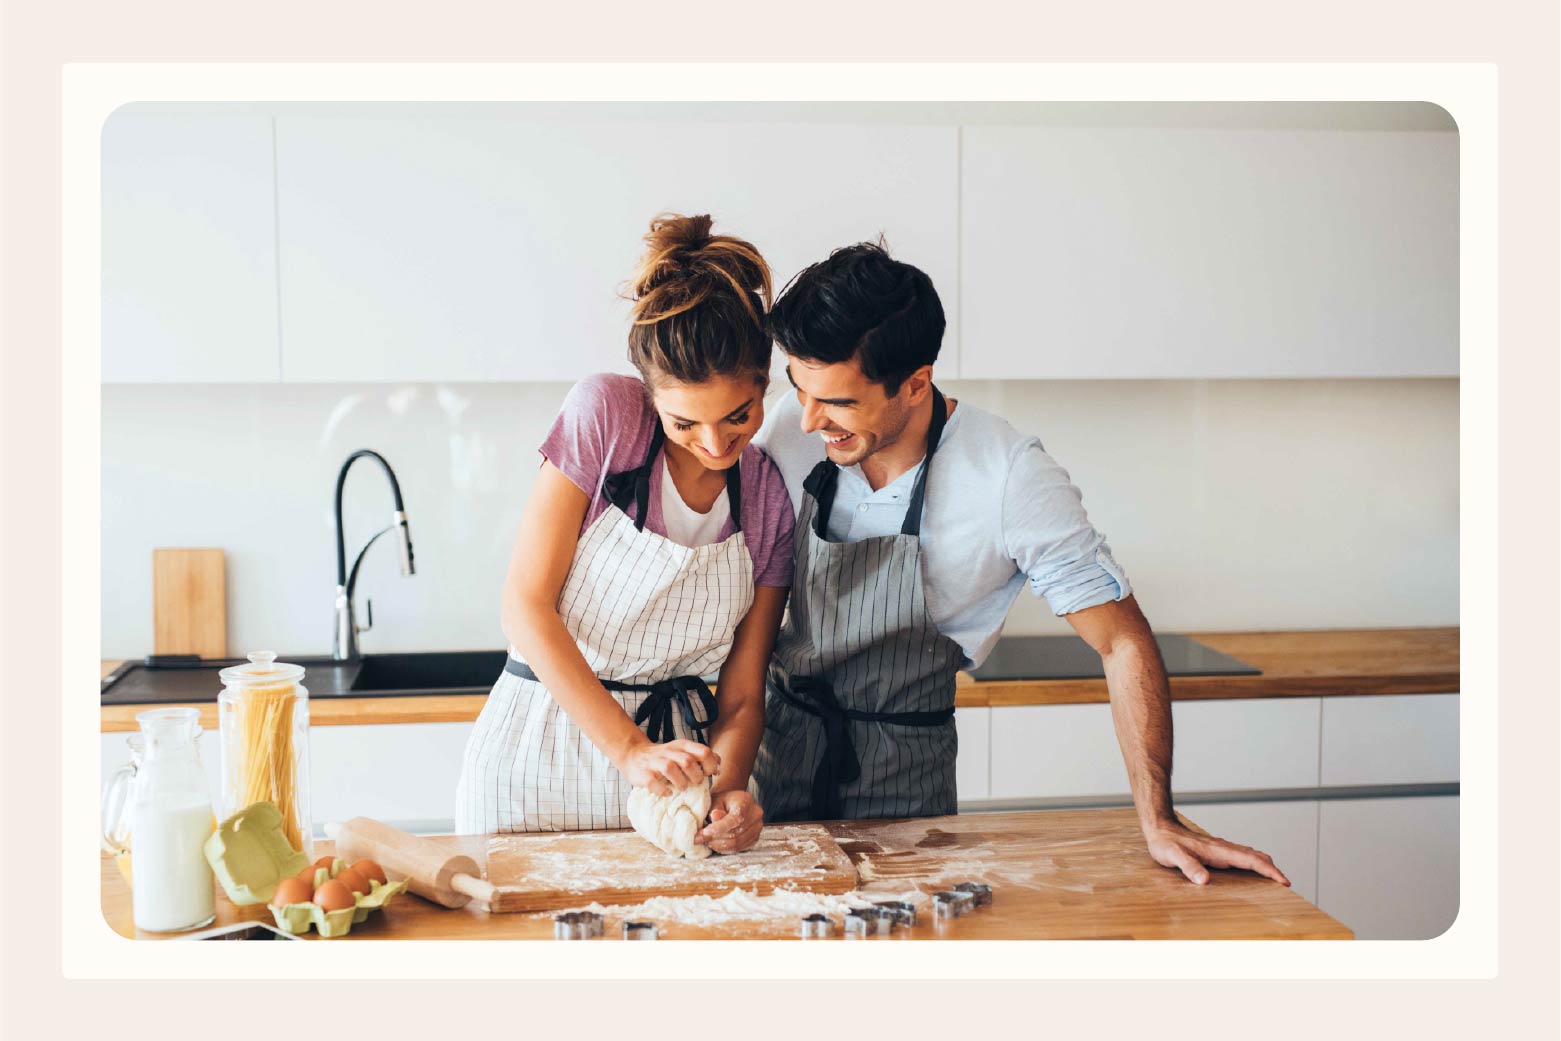 Man and woman standing close together while she kneads cookie dough on kitchen counter